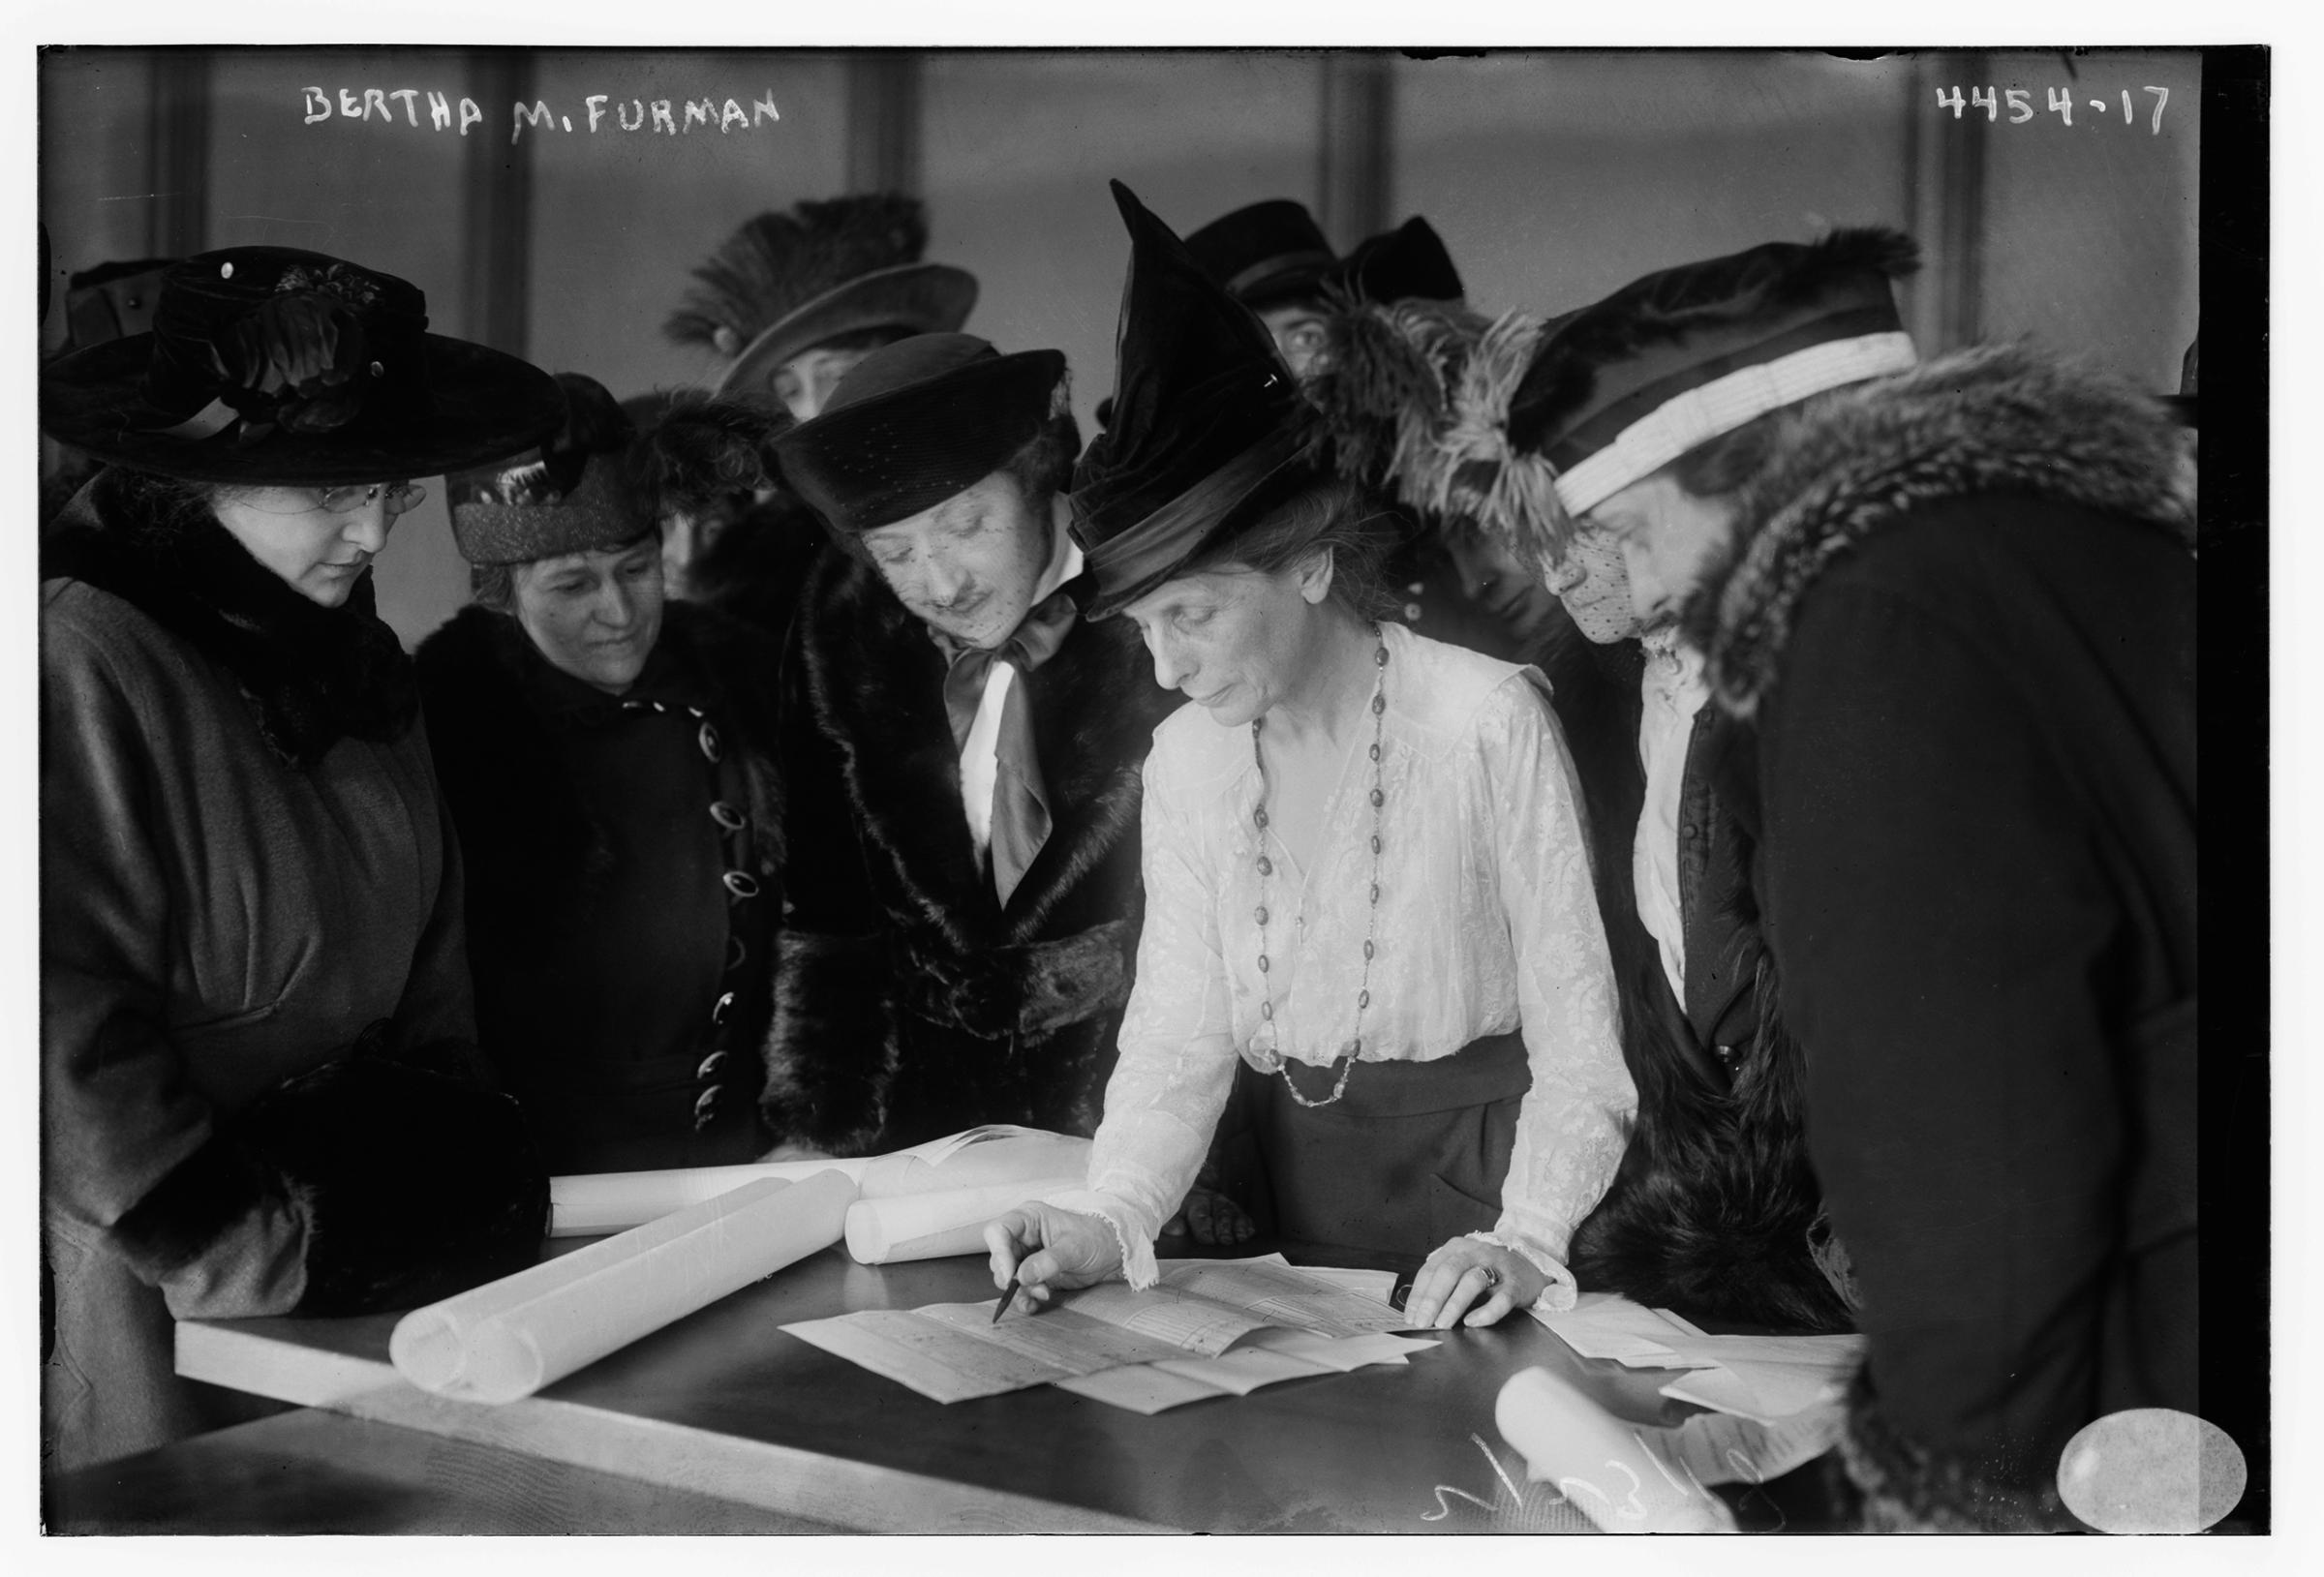 Photograph shows suffragist shows Bertha M. Furman (d. 1930) who worked for the League of Women Voters, teaching women how to vote. (Source: Flickr Commons project, 2016 and similar Bain negative: LC-B2- 4454-16) http://www.loc.gov/pictures/item/ggb2006001399/